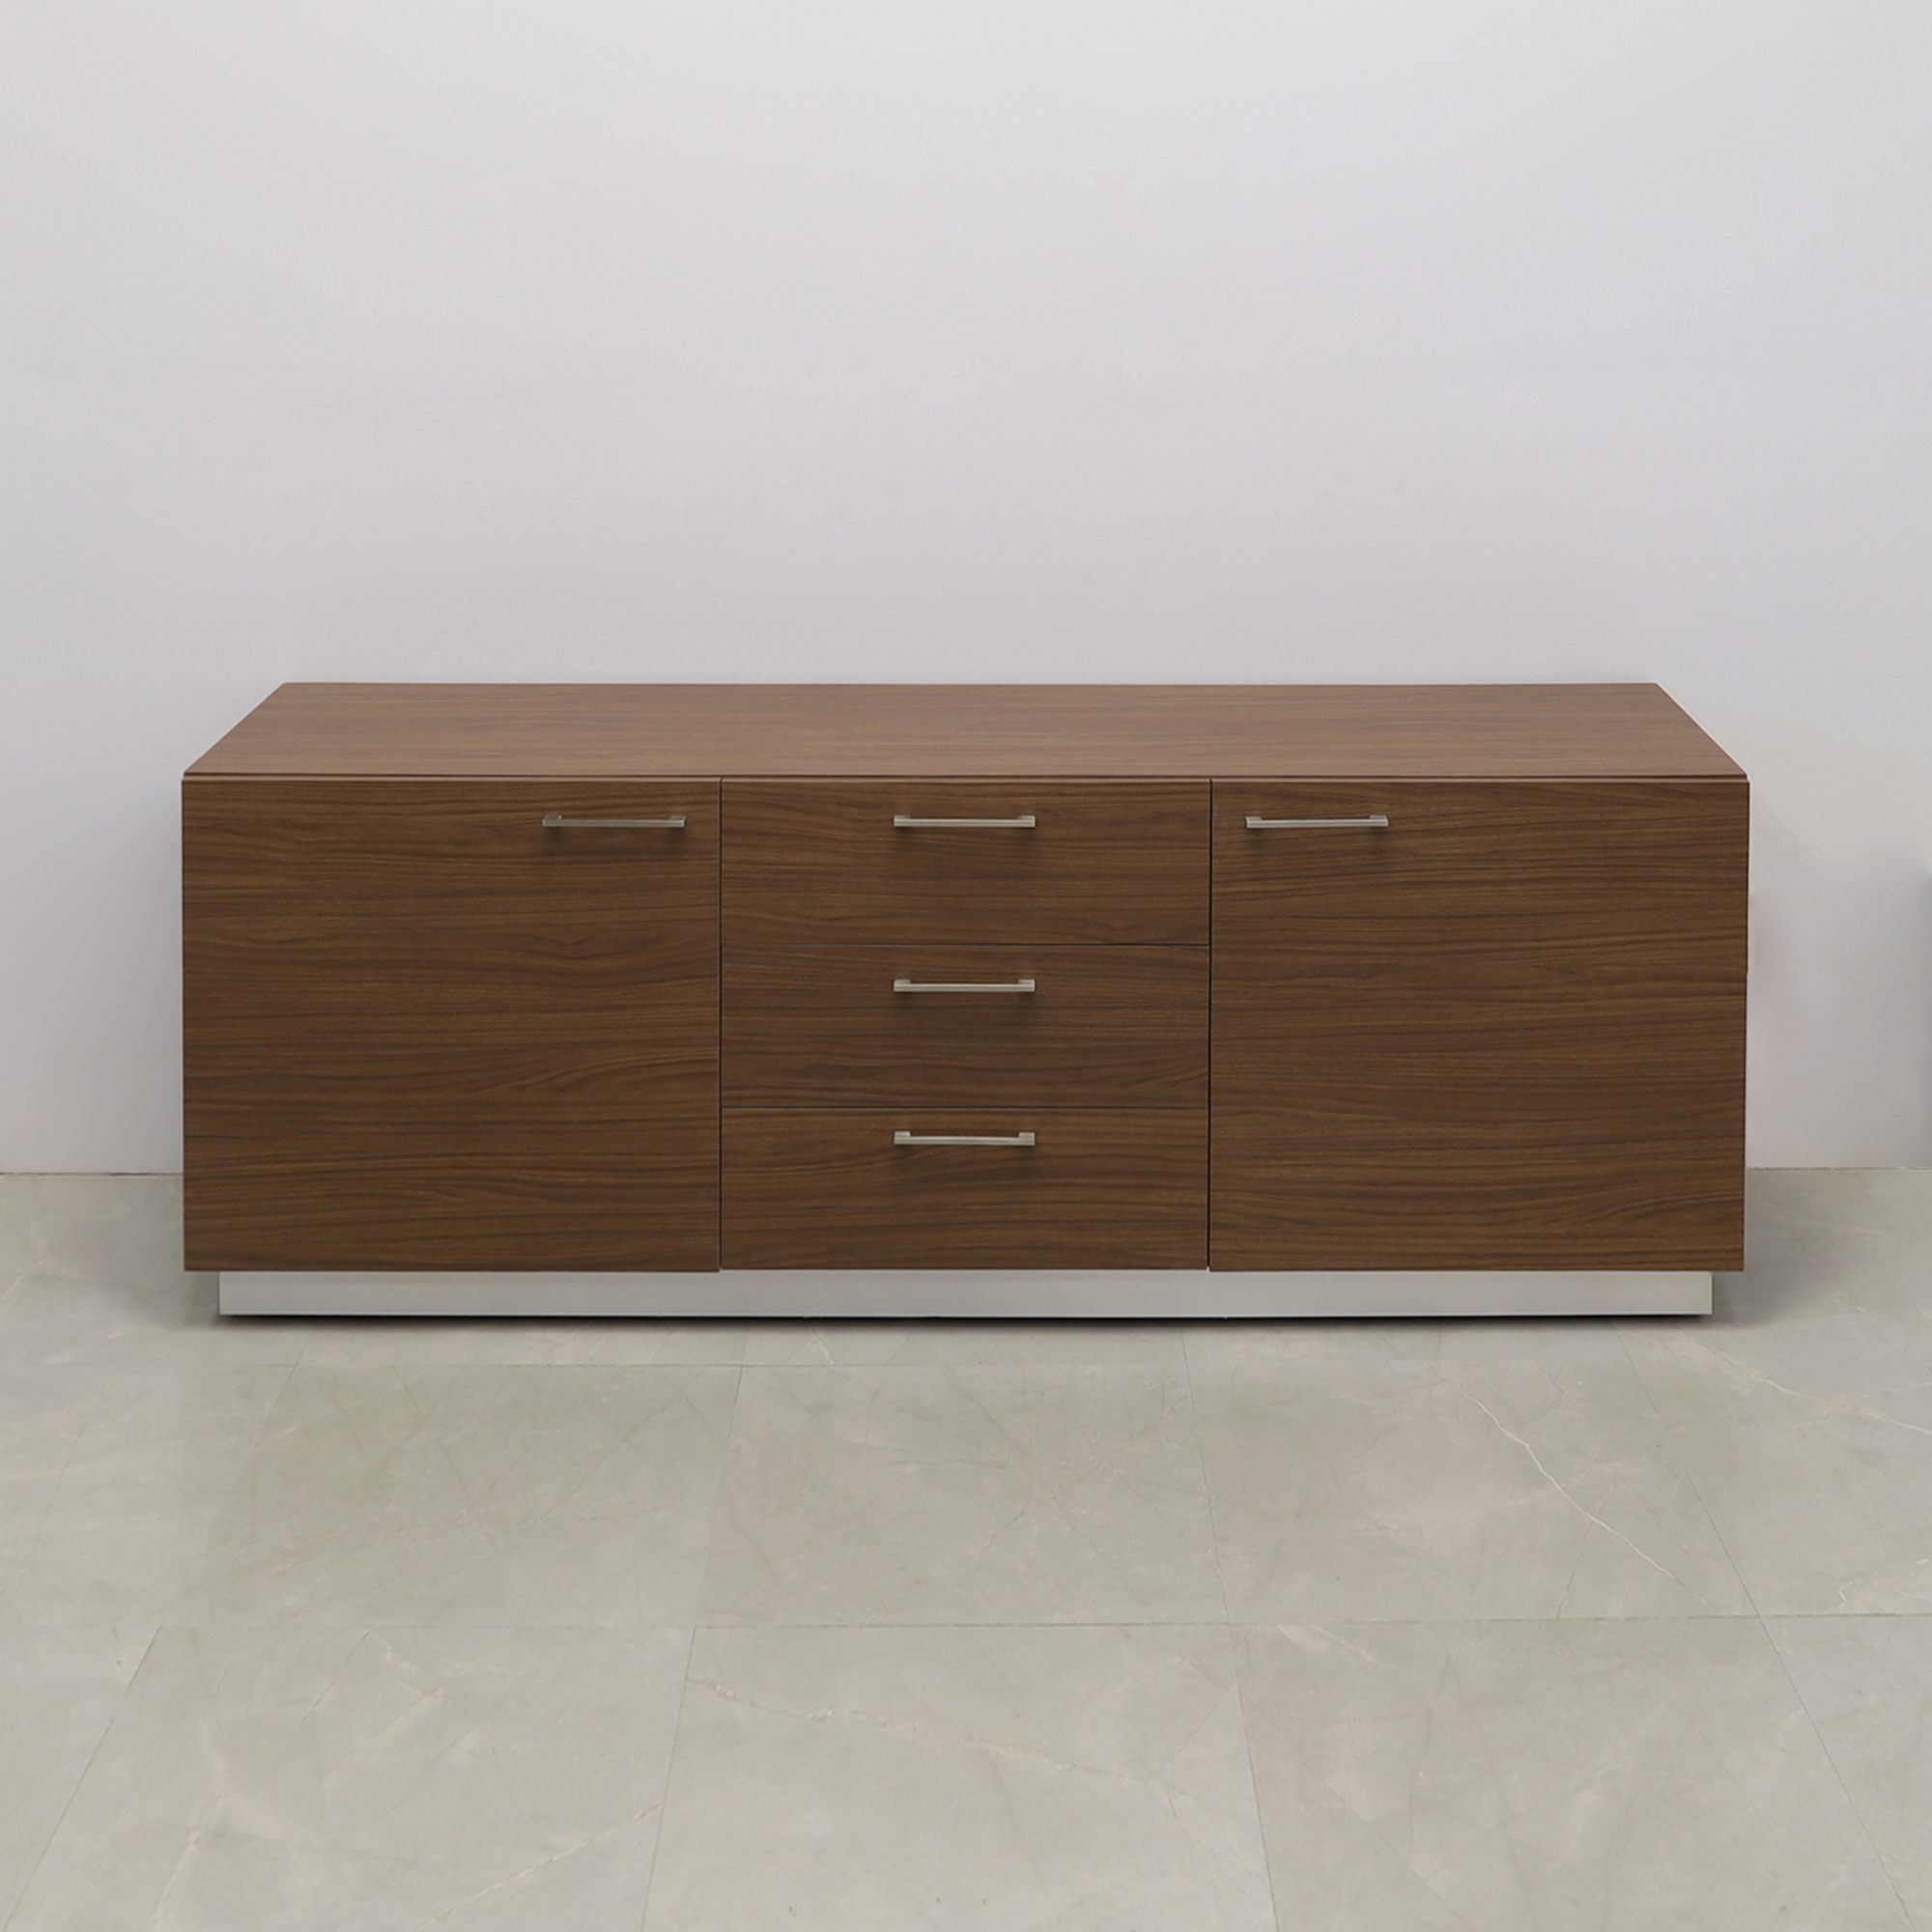 84-inch Manhattan Storage Credenza in walnut heights matte laminate credenza, front drawers & doors, and brushed aluminum toe-kick, shown here.